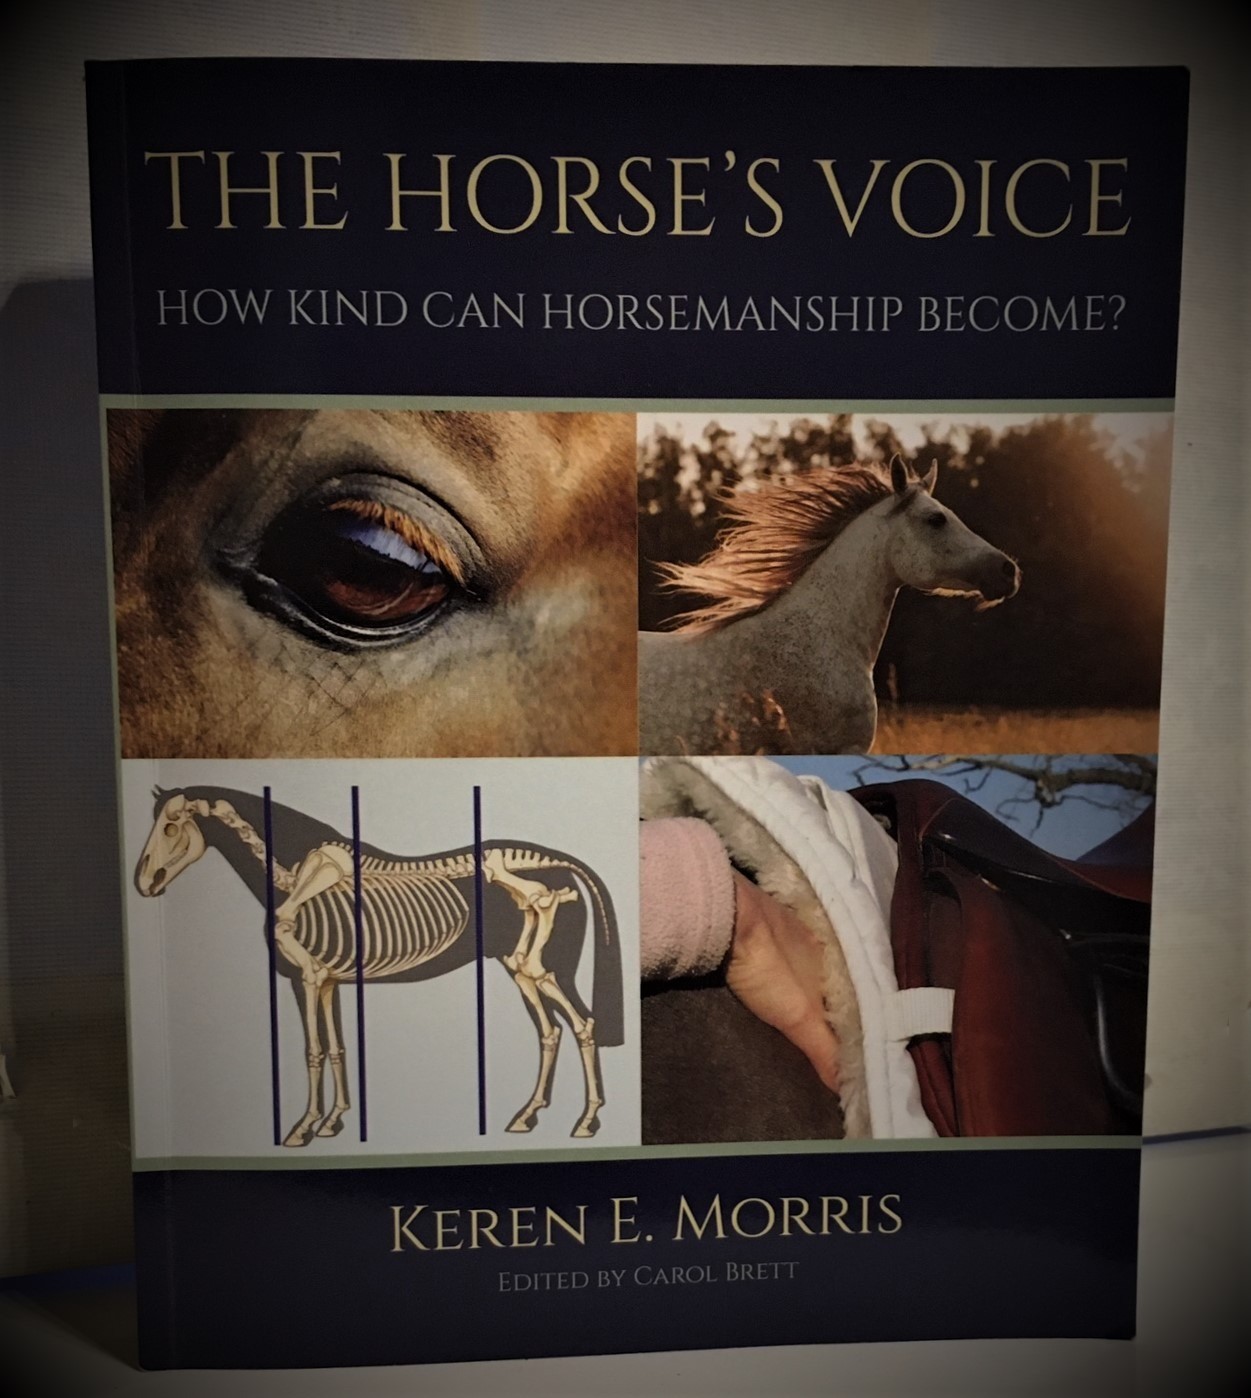 The Horse's Voice